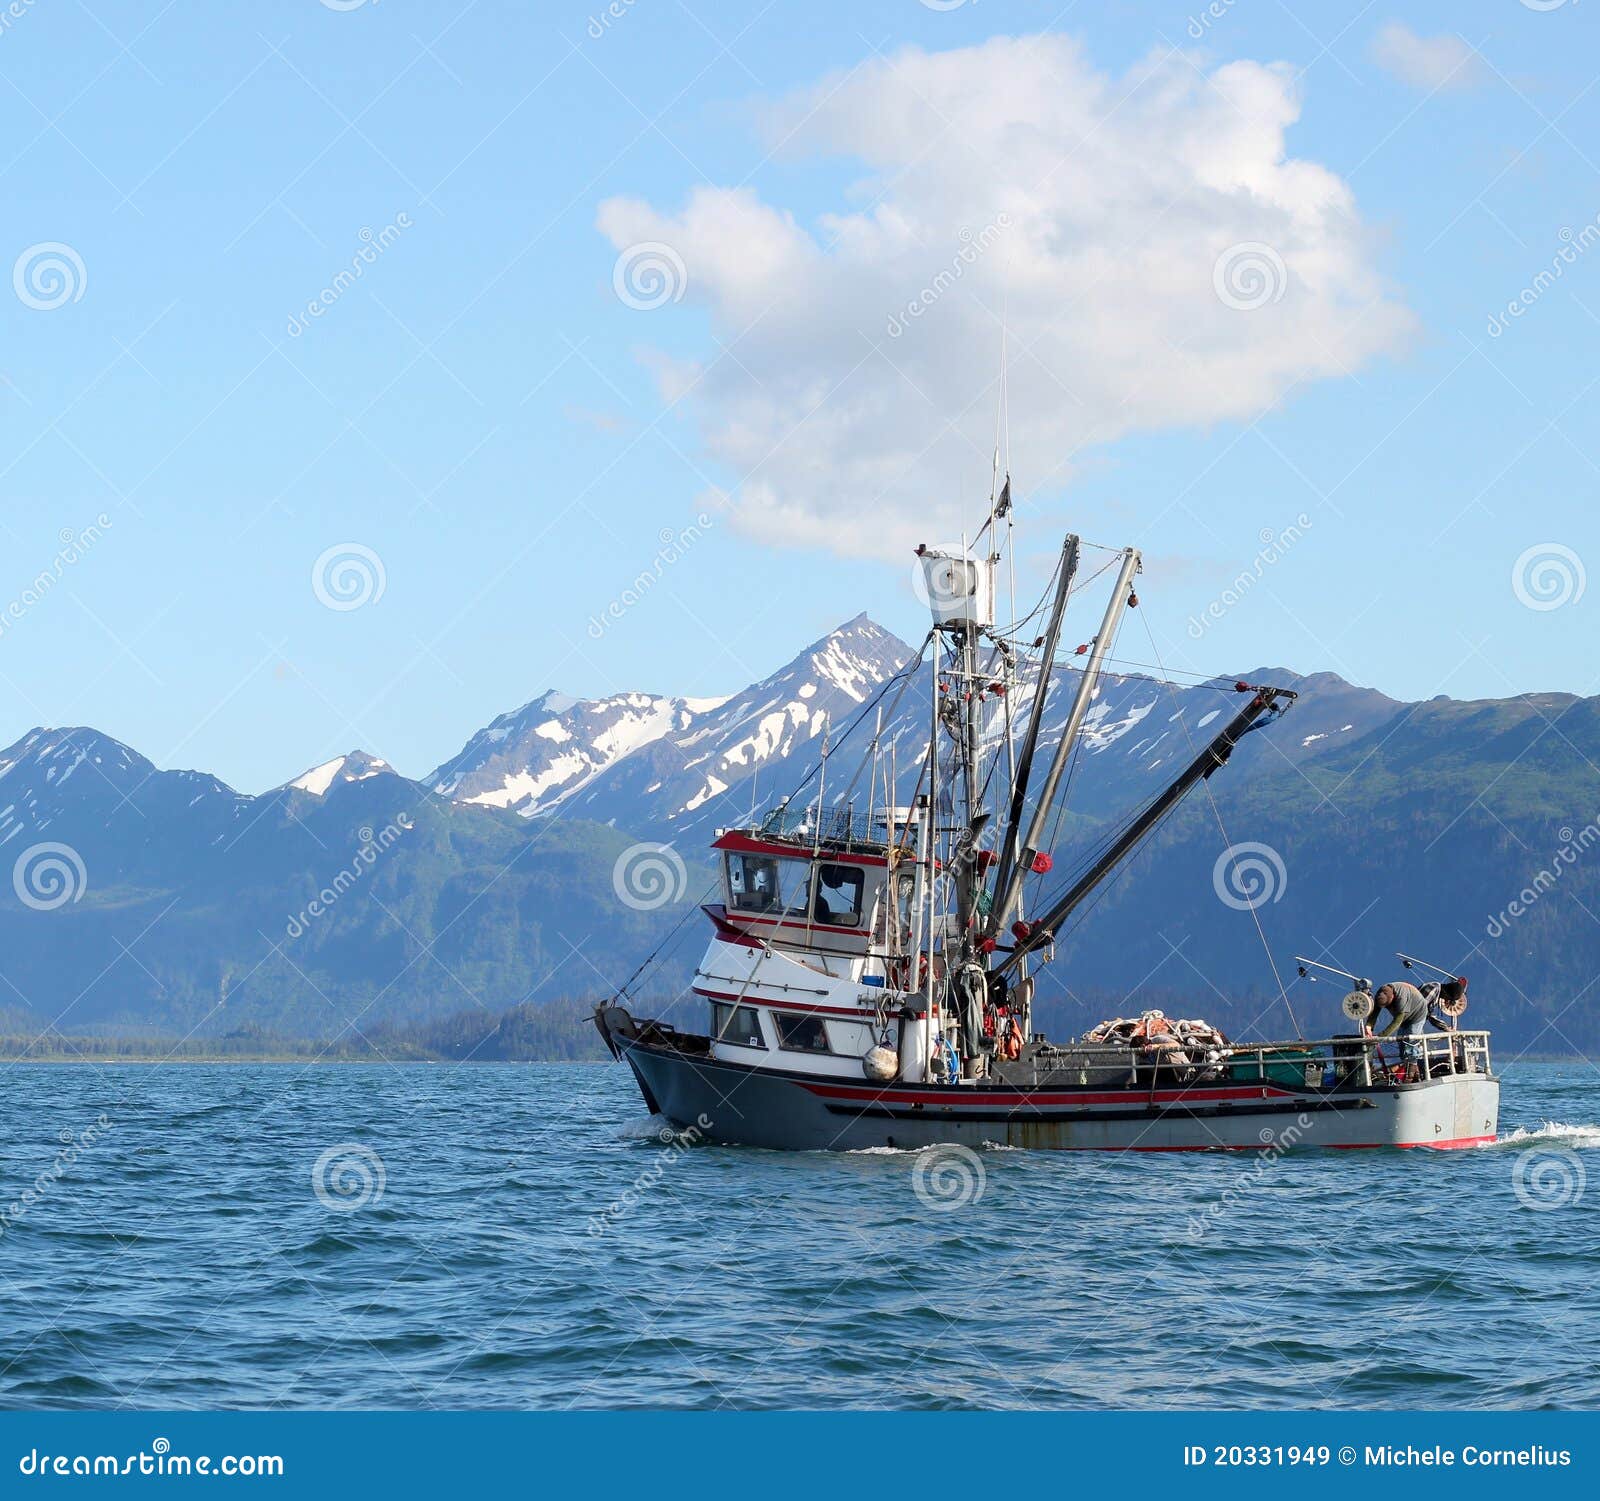 Alaskan Fishing Boat Heading Out To Sea Royalty Free Stock Images ...